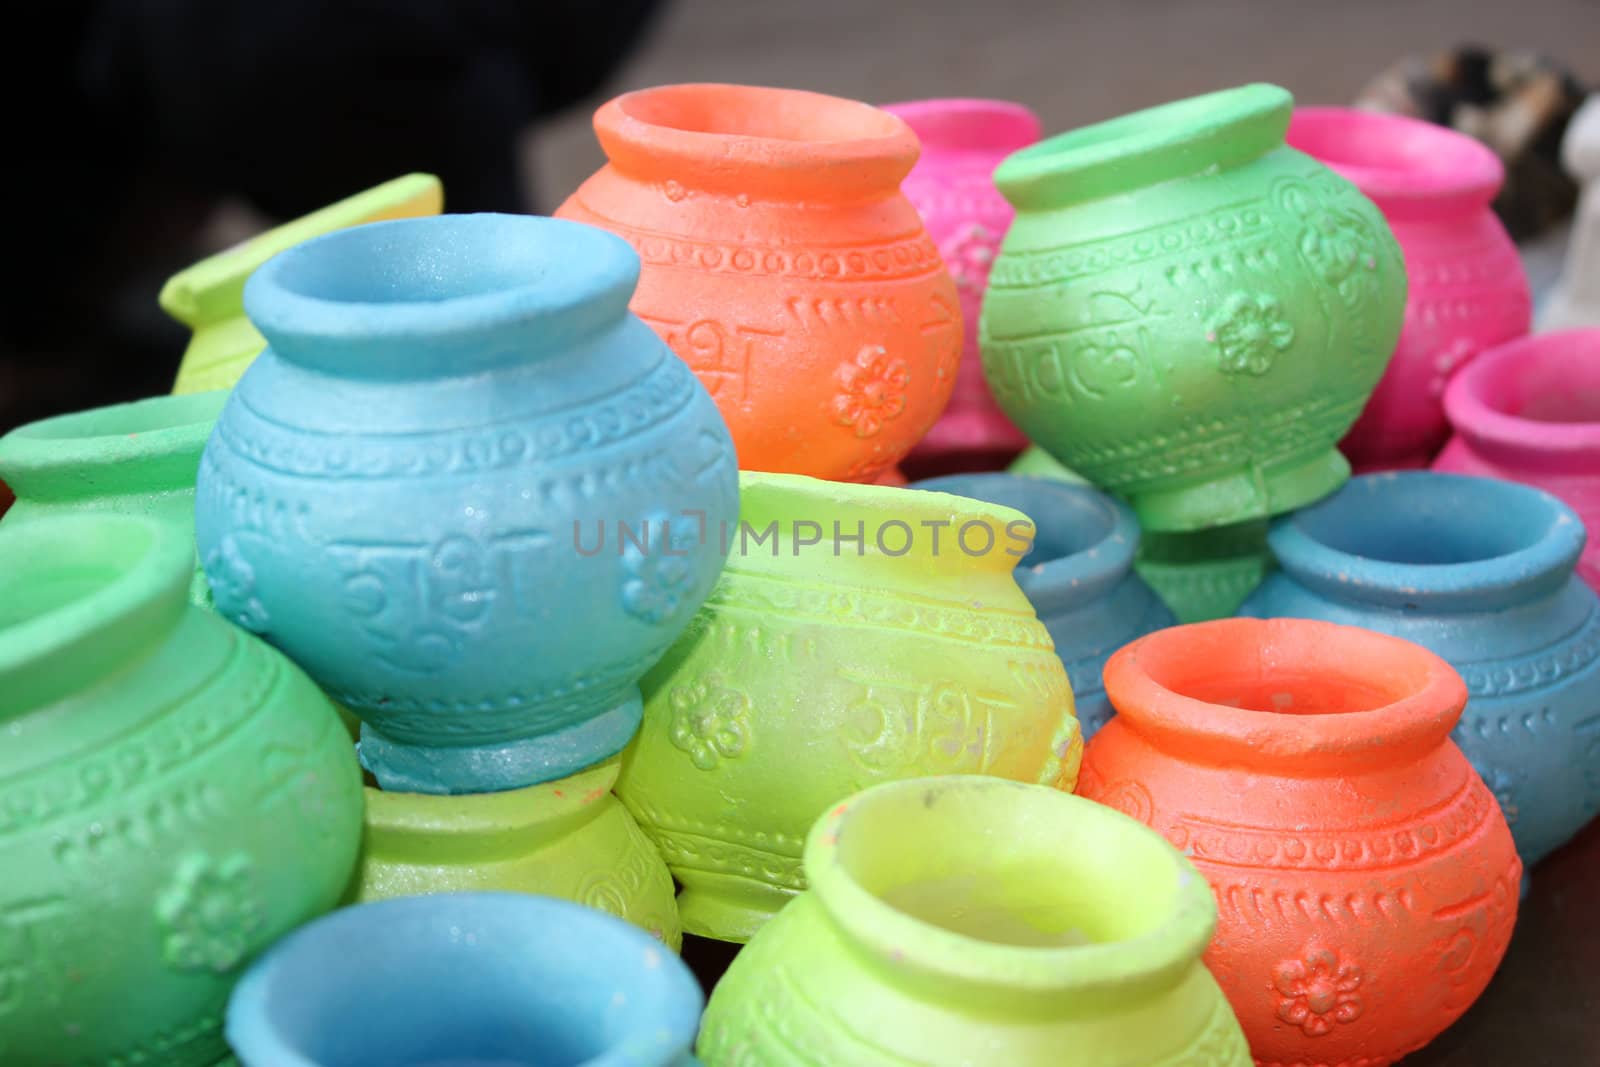 A set of brightly colored pots with traditional religious design for Diwali festival.